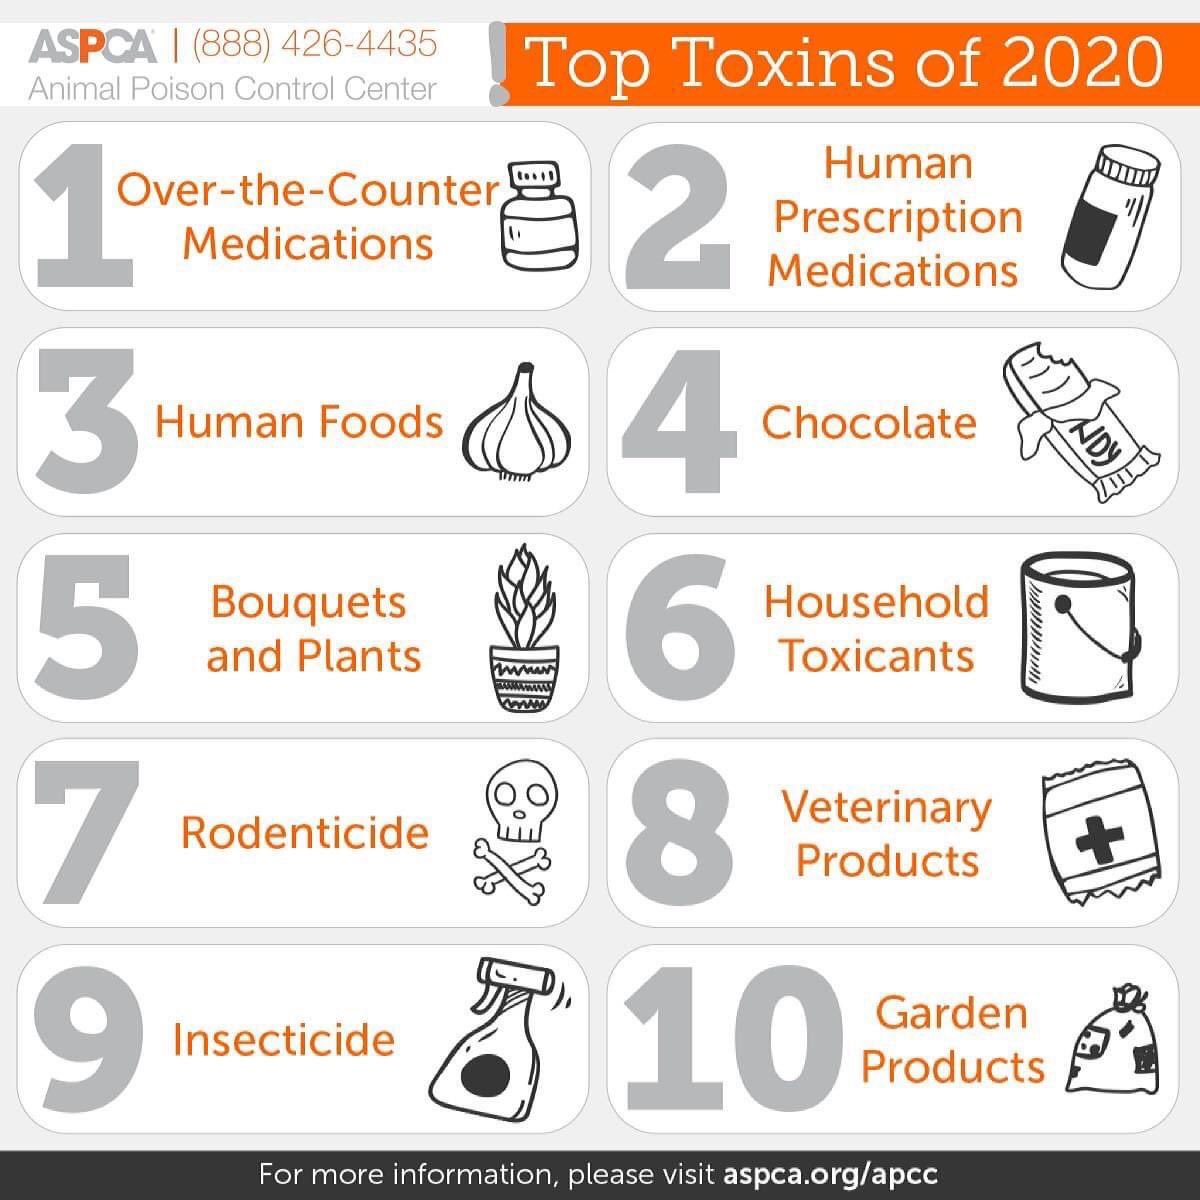 It’s National Poison Prevention Week and here is APCC’s Top Pet Toxin List from last year. For more information on how to keep your home safe for your animals please visit aspca.org/apcc 

Thank you! ♥️🐾

#bereaarf #animalrescuefriends
#nationalpoisonpreventionweek